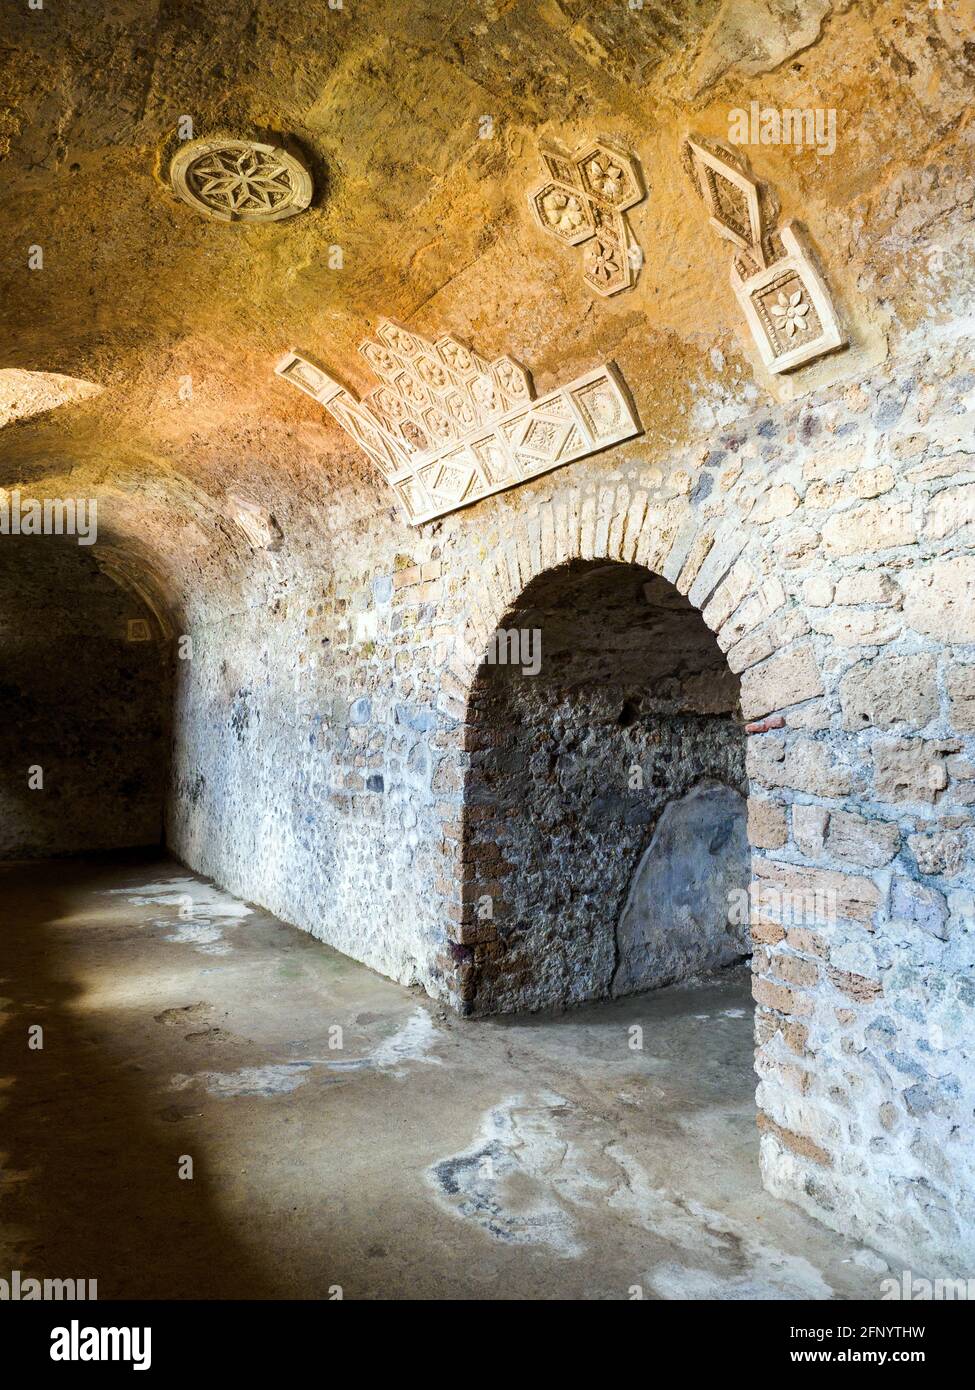 Vault decorated with arches and panels of stucco - House of the Cryptoporticus (Casa del Criptoportico) - Pompeii archaeological site, Italy Stock Photo